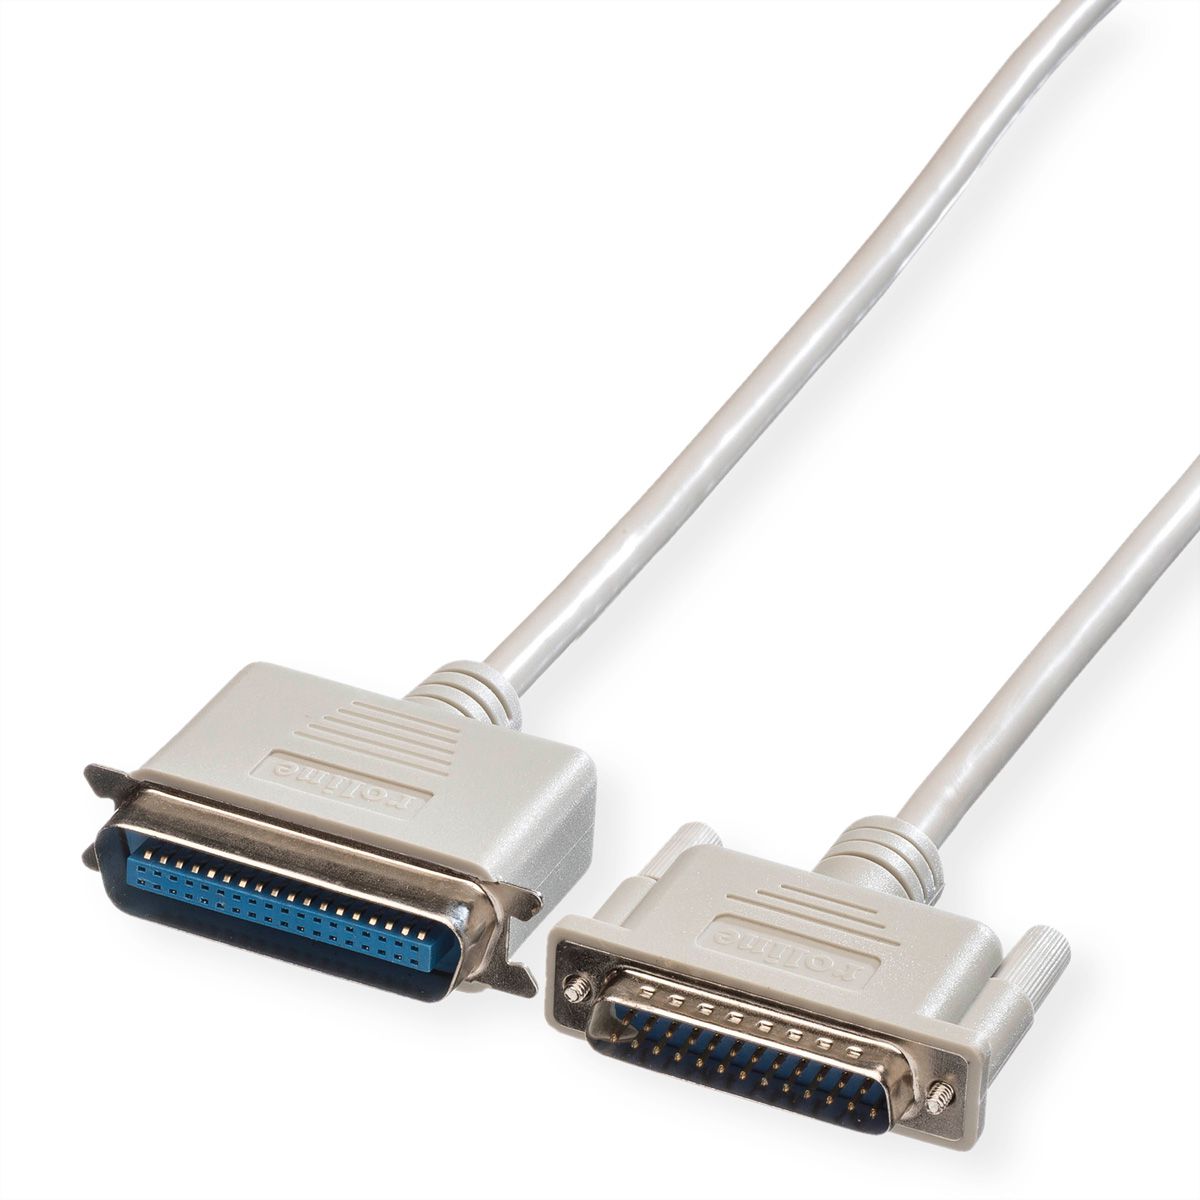 P606-006 DB25 to Cen36 M/M Tripp Lite IEEE 1284 AB Parallel Printer Cable 6-ft. 